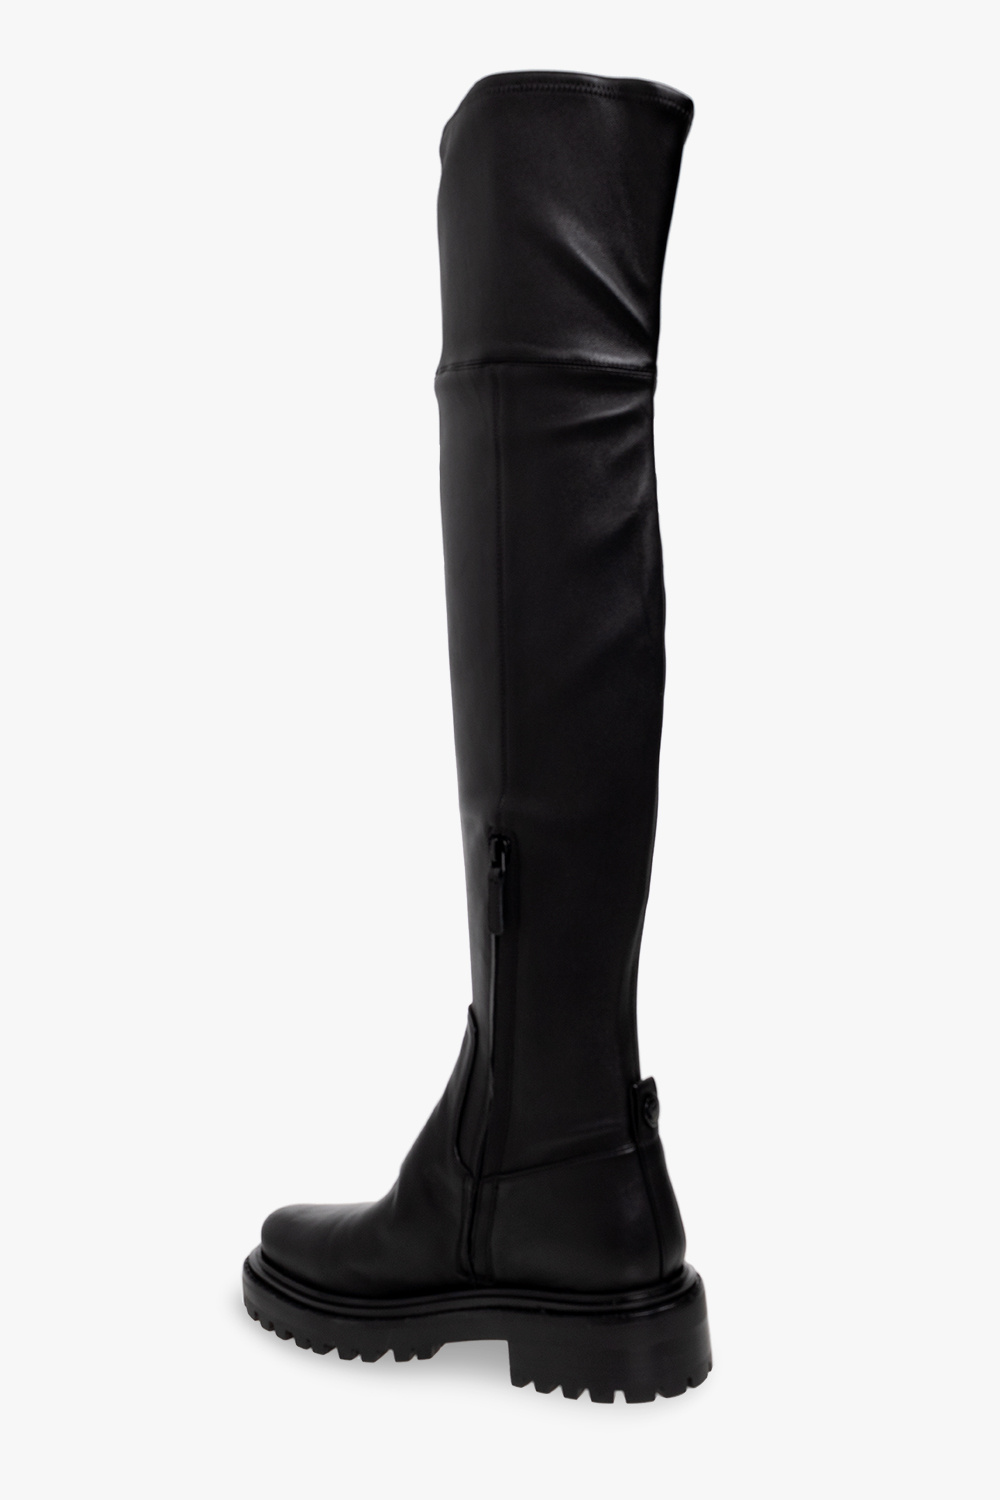 Tory Burch 'Utlility Lug' over-the-knee boots | Women's Shoes | Vitkac